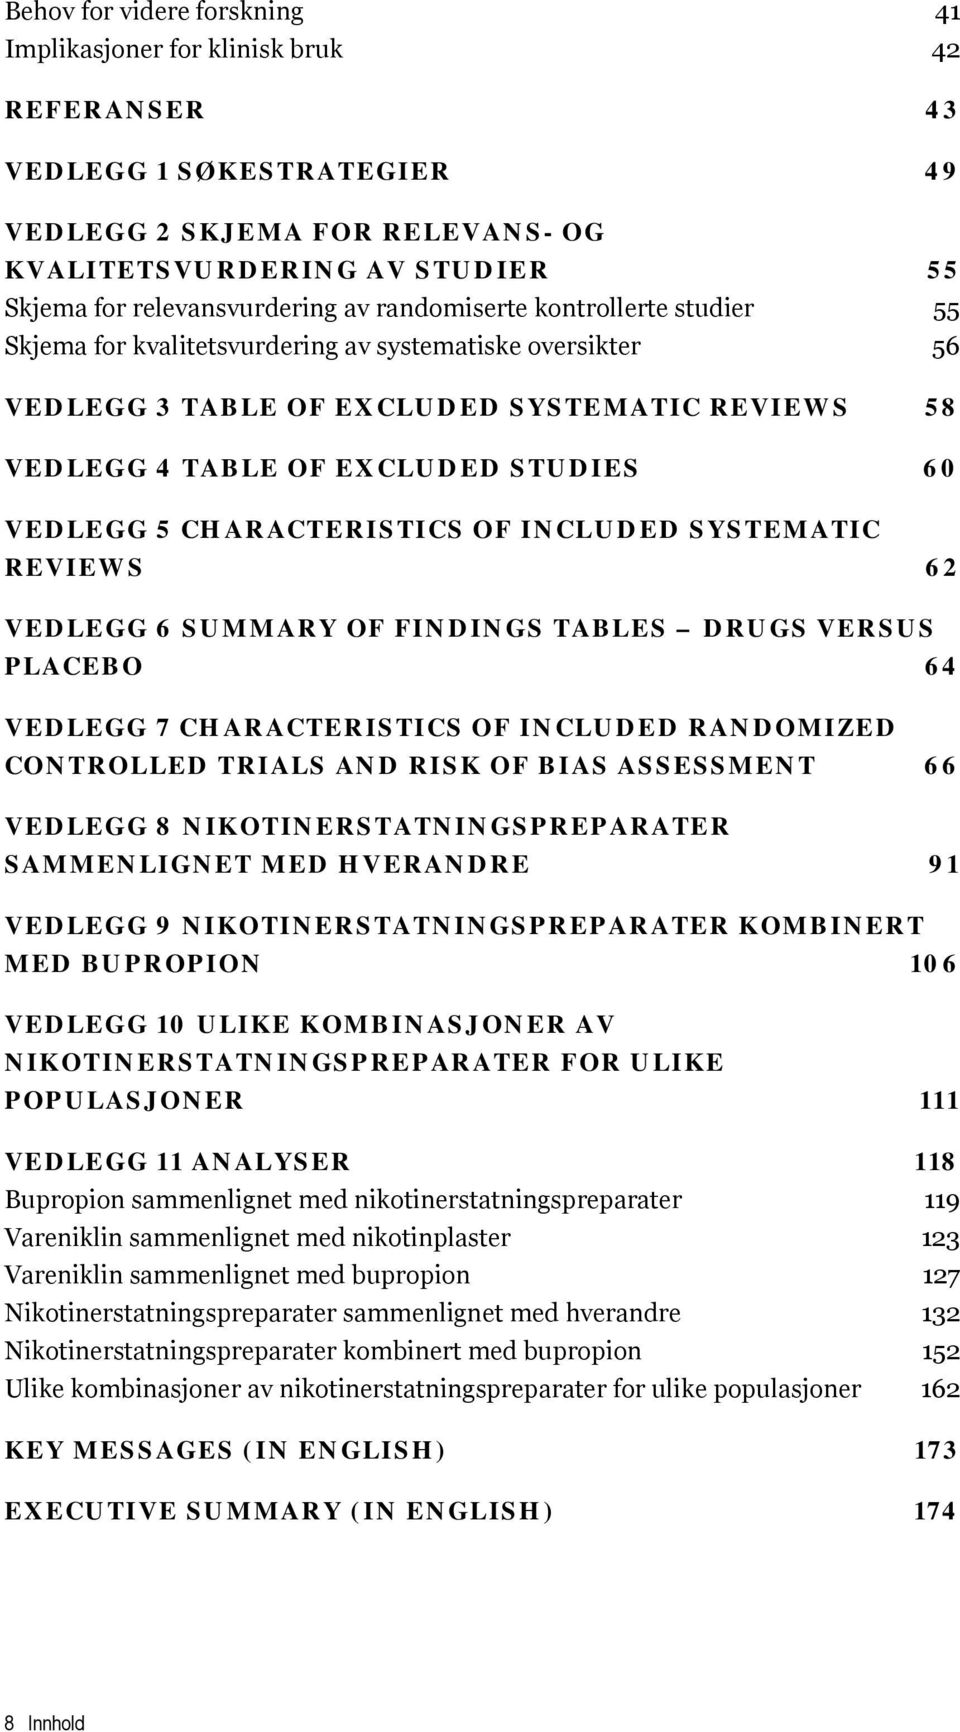 STUDIES 60 VEDLEGG 5 CHARACTERISTICS OF INCLUDED SYSTEMATIC REVIEWS 62 VEDLEGG 6 SUMMARY OF FINDINGS TABLES DRUGS VERSUS PLACEBO 64 VEDLEGG 7 CHARACTERISTICS OF INCLUDED RANDOMIZED CONTROLLED TRIALS